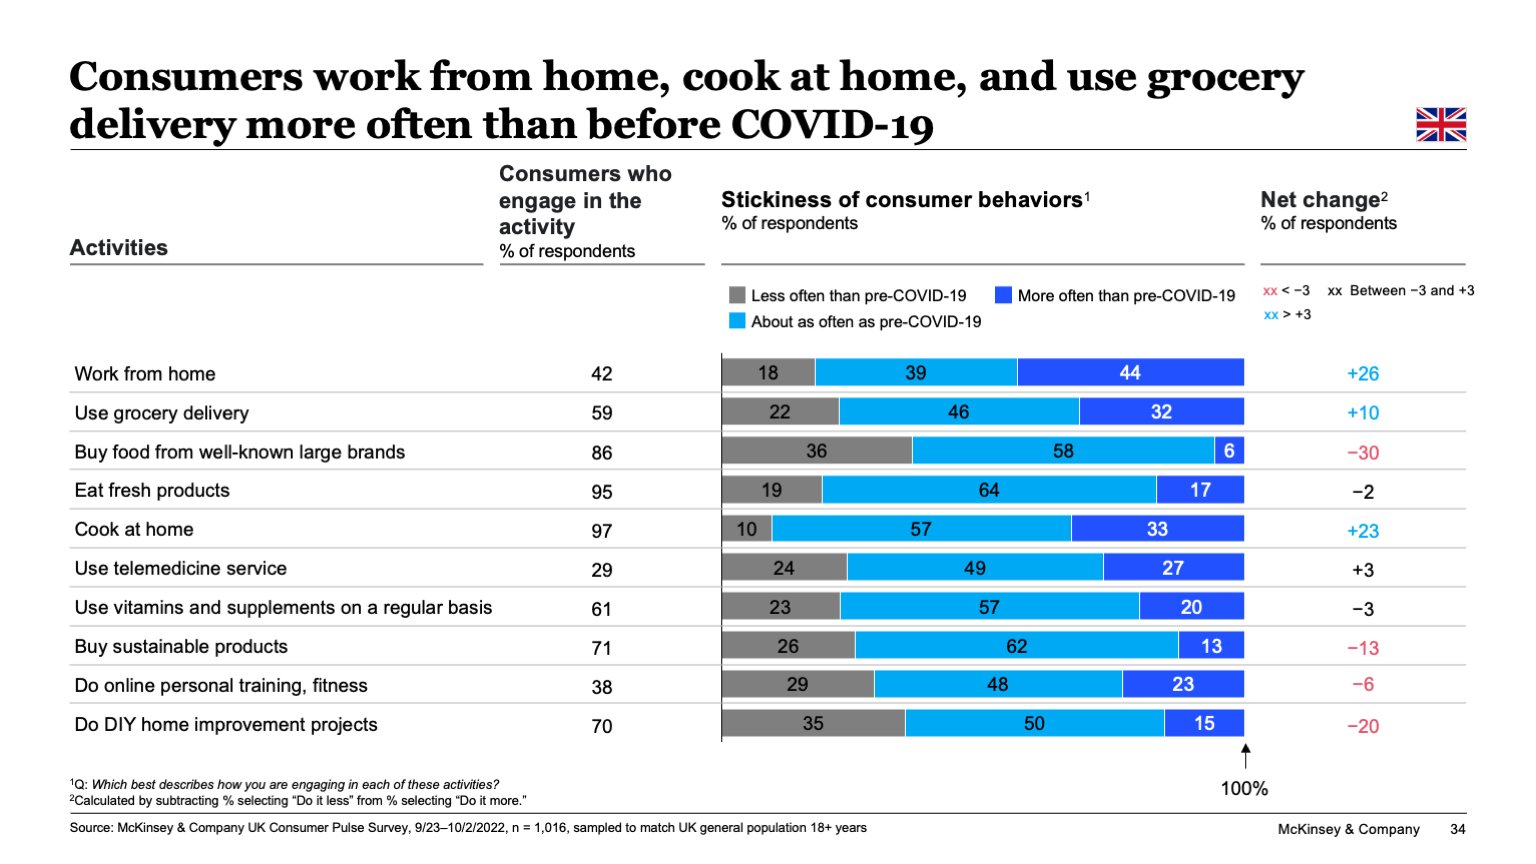 Consumers work from home, cook at home, and use grocery delivery more often than before COVID-19